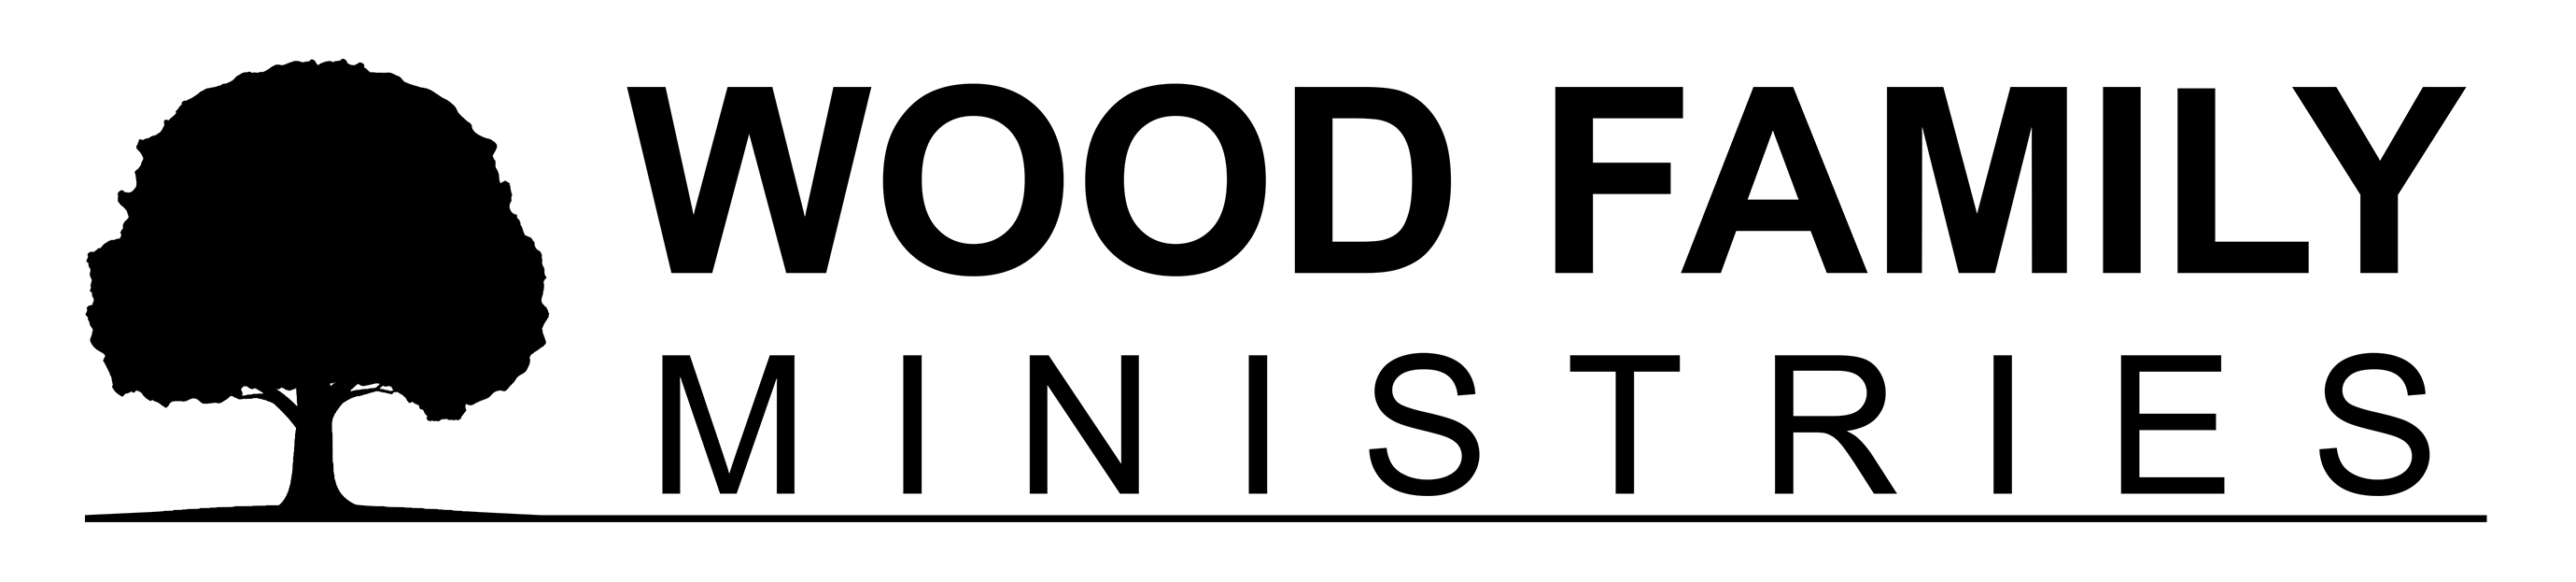 Wood Family Ministries